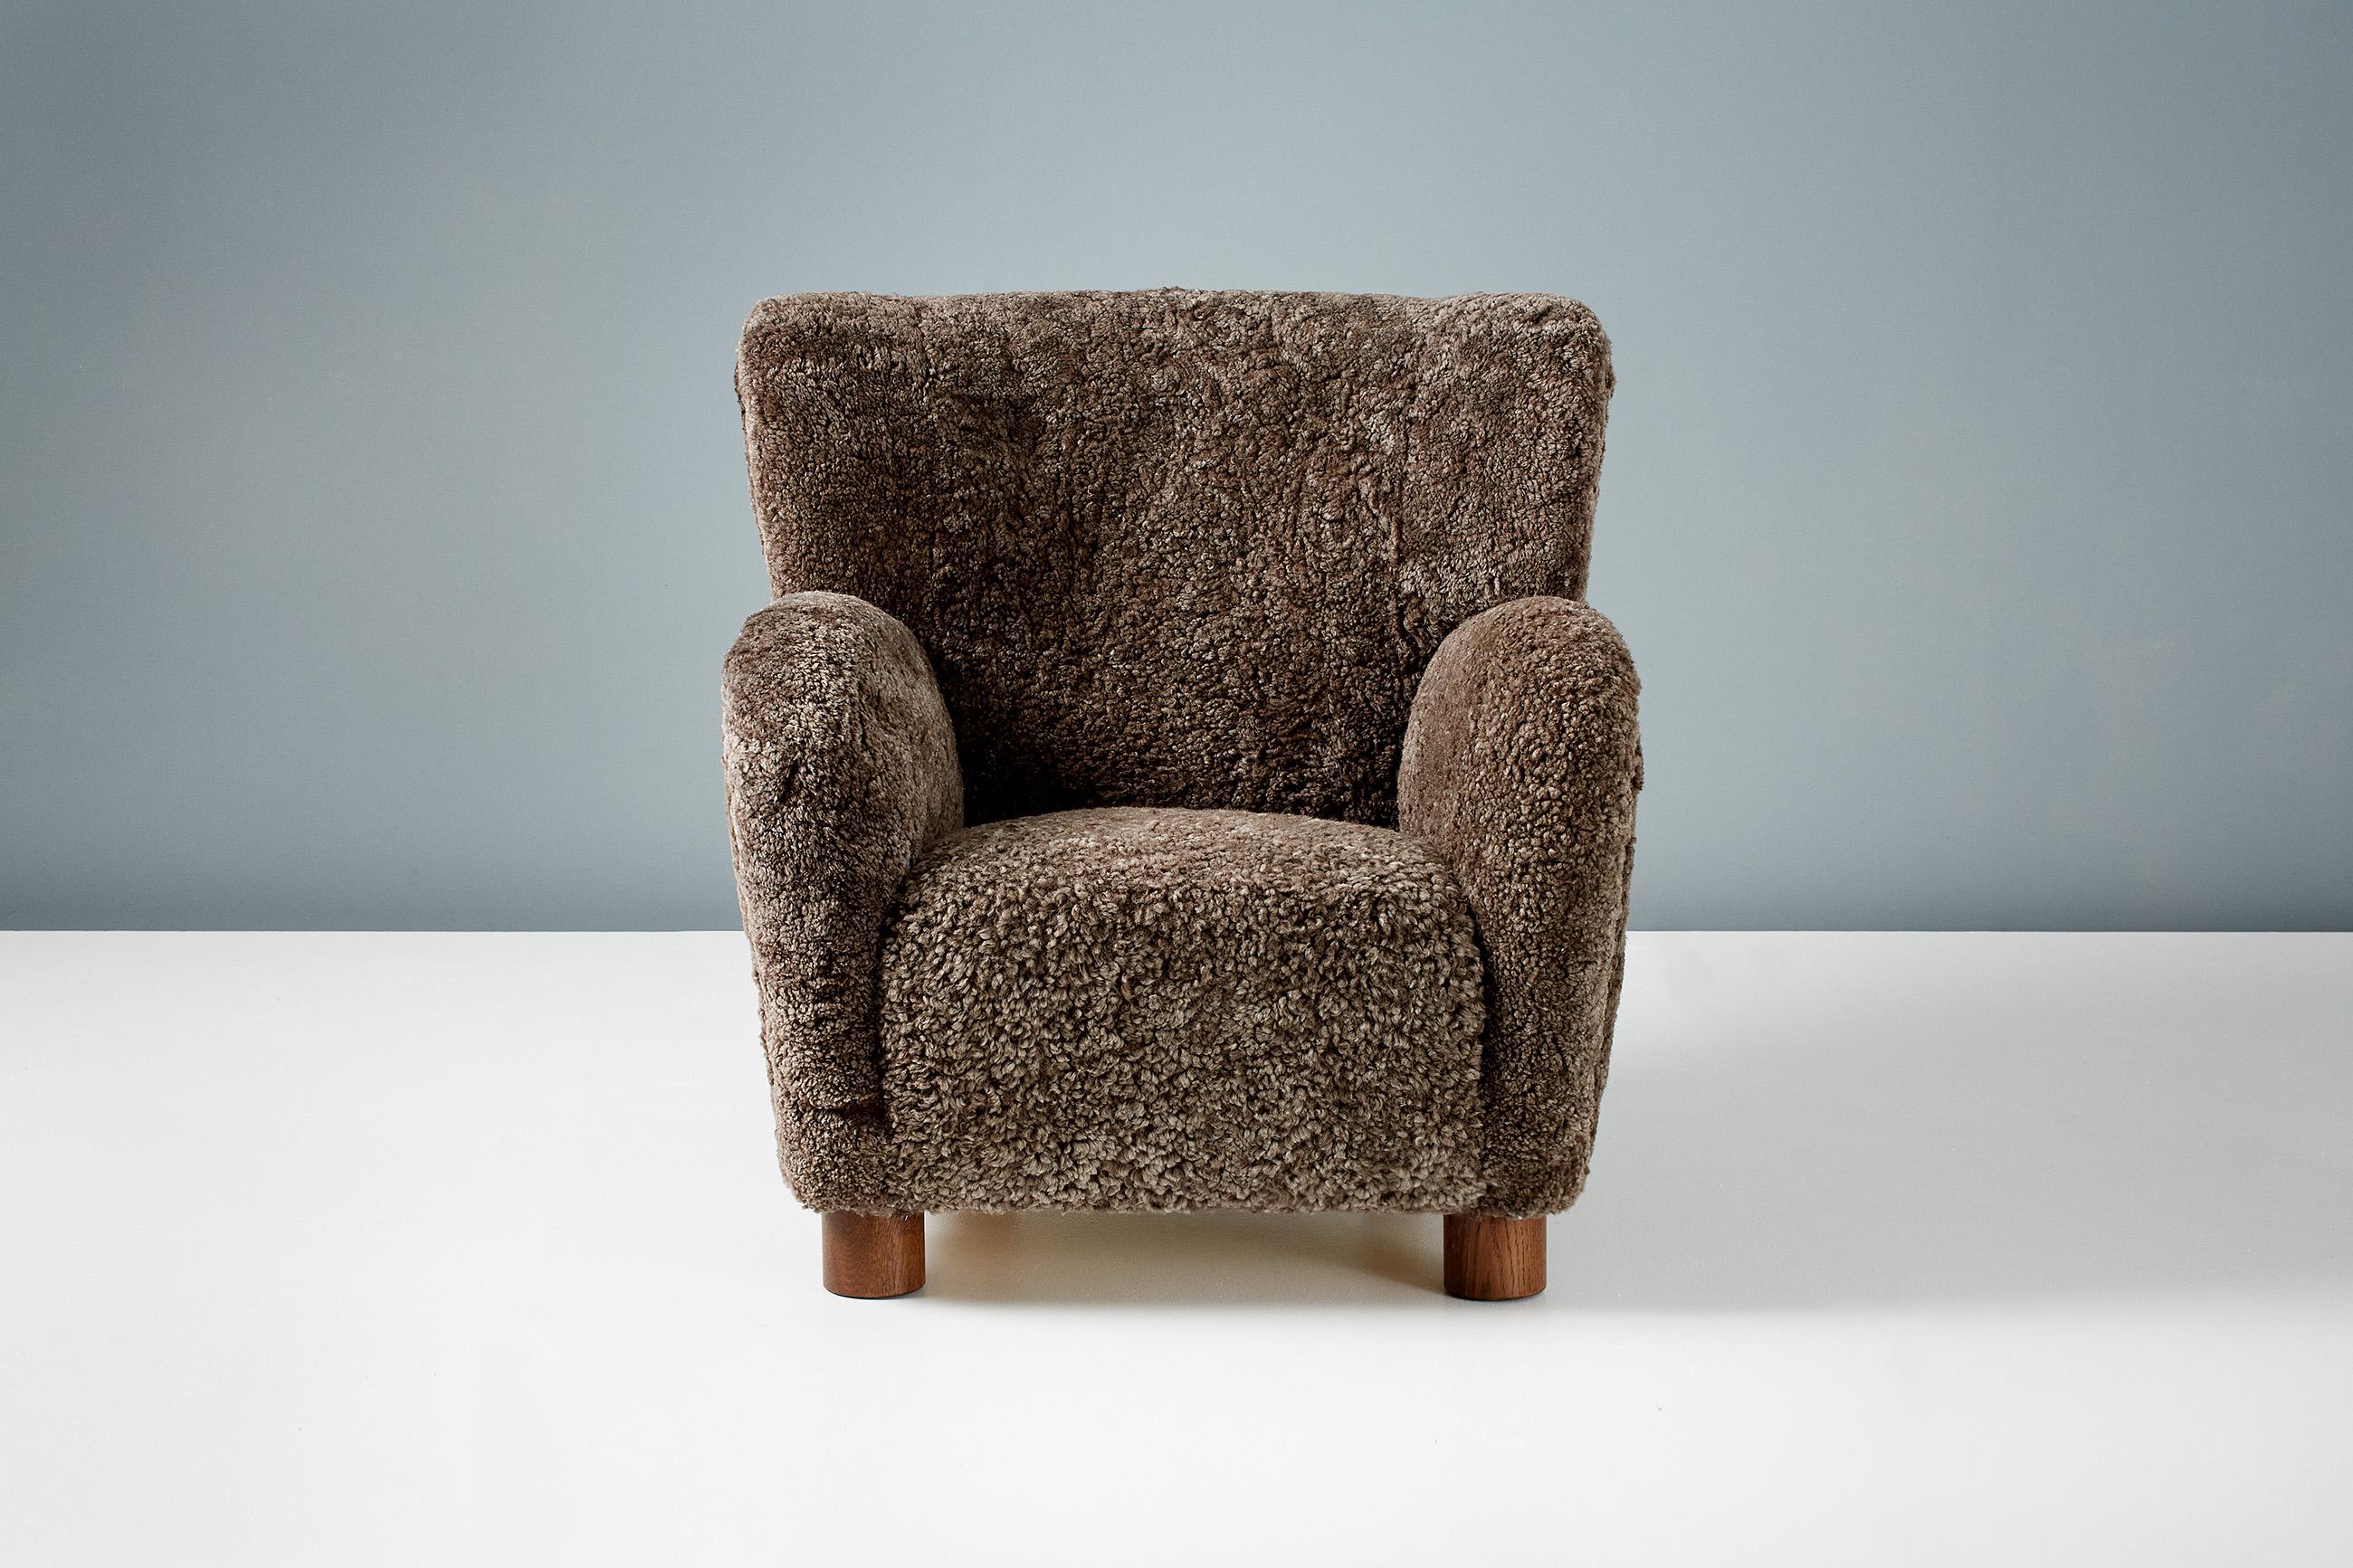 Dagmar Design - Karu lounge chair

These high-end lounge chairs are handmade to order at our workshops in England. The chair legs are available in oak or beechwood in a range of finishes. The frames are made from solid beechwood with a fully